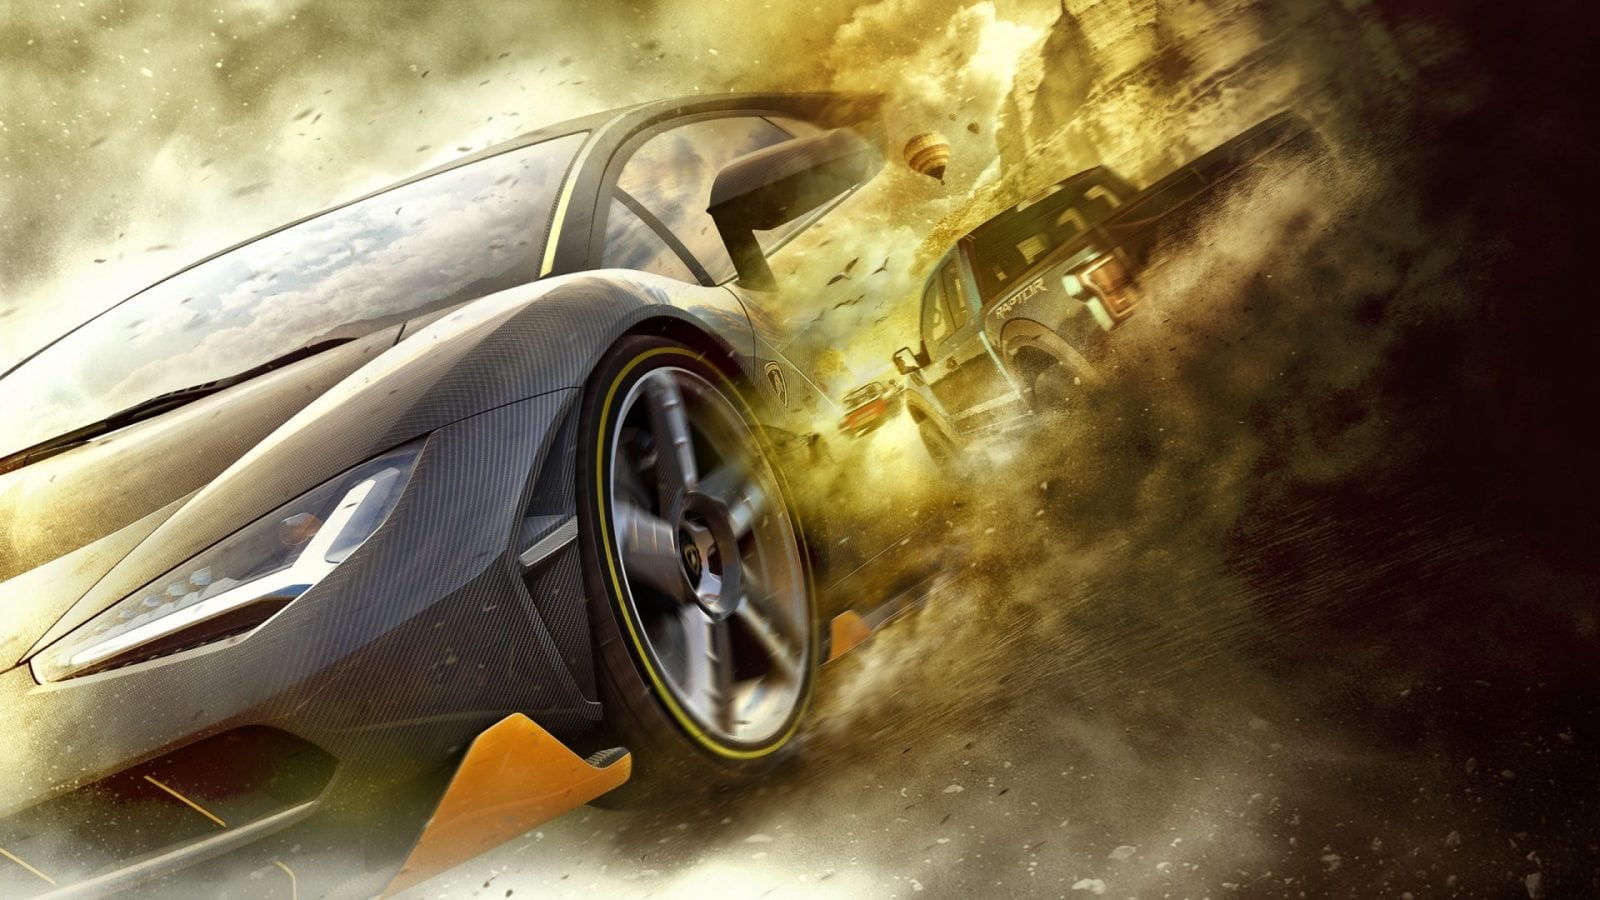 NEED FOR SPEED MOST WANTED E NO LIMITS PACOTES - CARROS - CARS